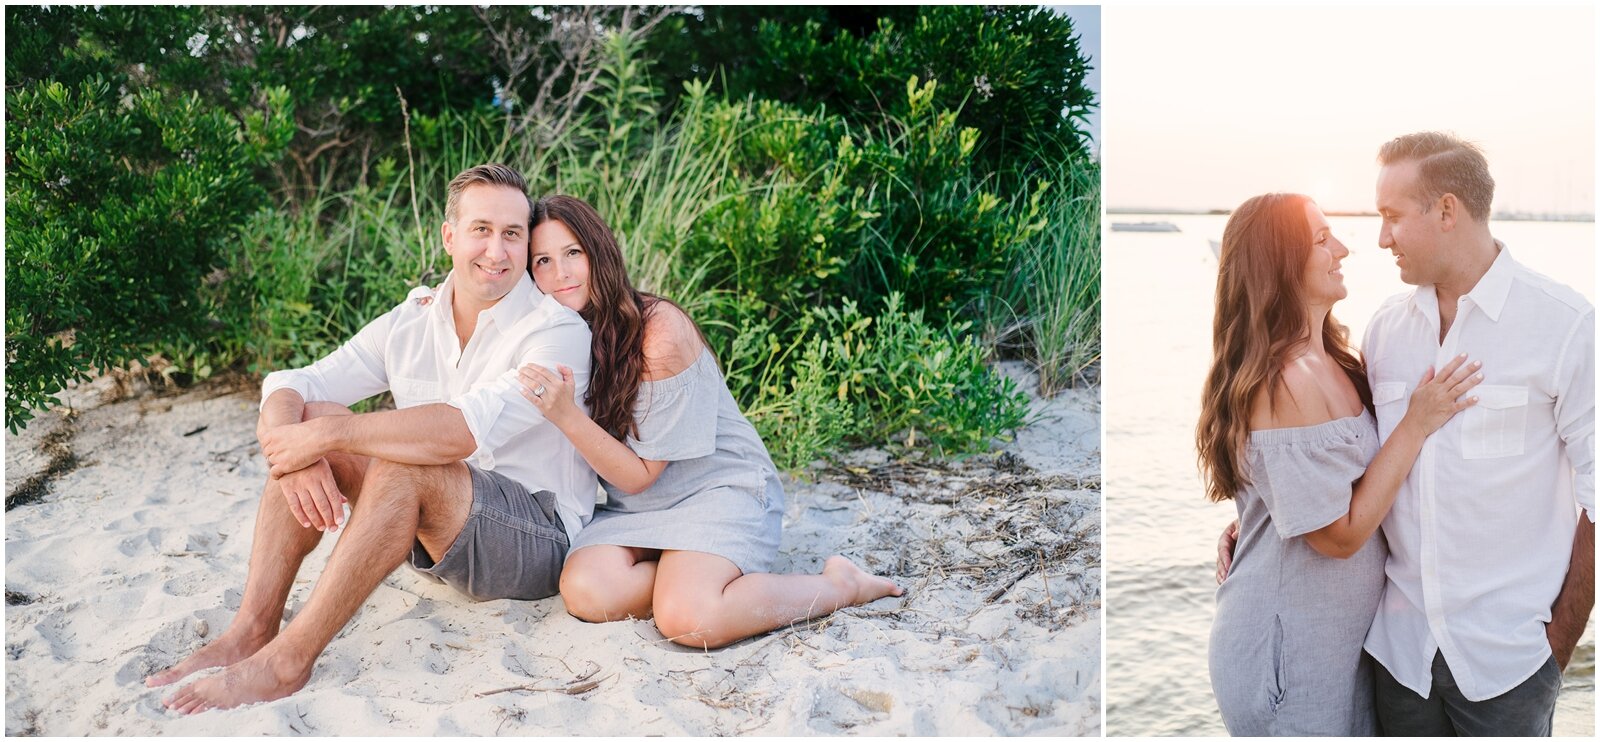  Husband and wife photos on the beach in summertime 